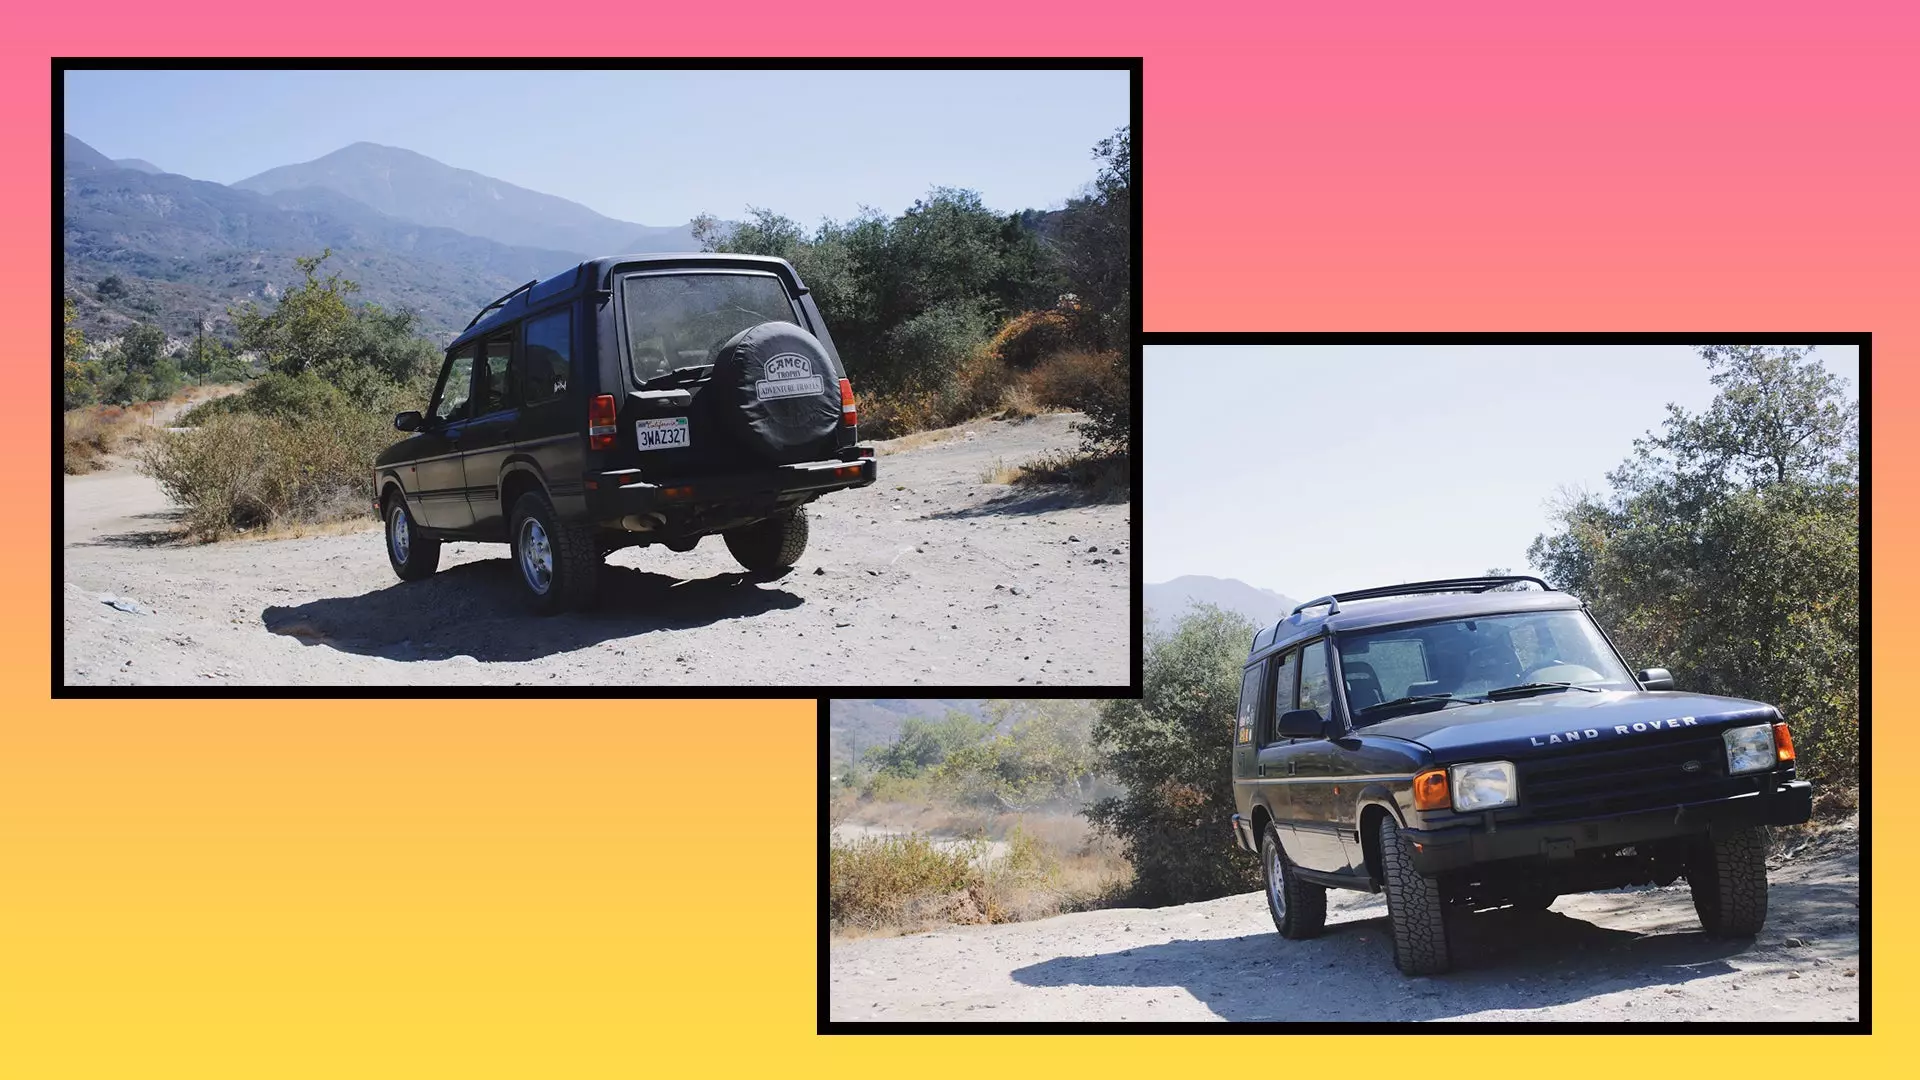 I Did a Dry Off-Road Run With My Land Rover Discovery, and Things Ended Annoyingly | Autance